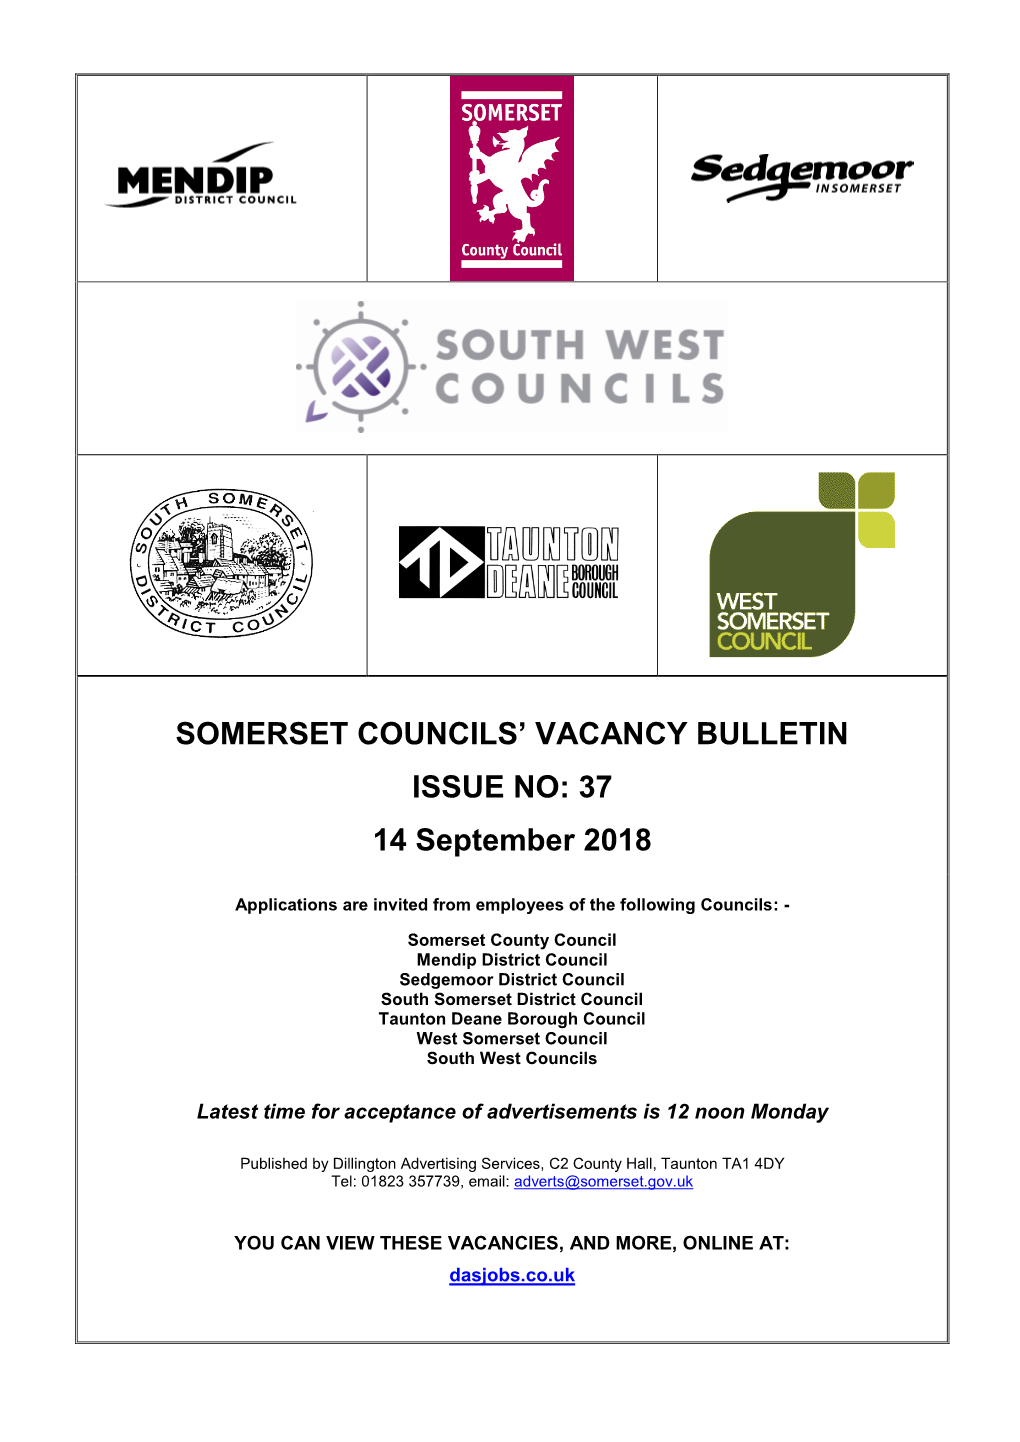 SOMERSET COUNCILS' VACANCY BULLETIN ISSUE NO: 37 14 September 2018